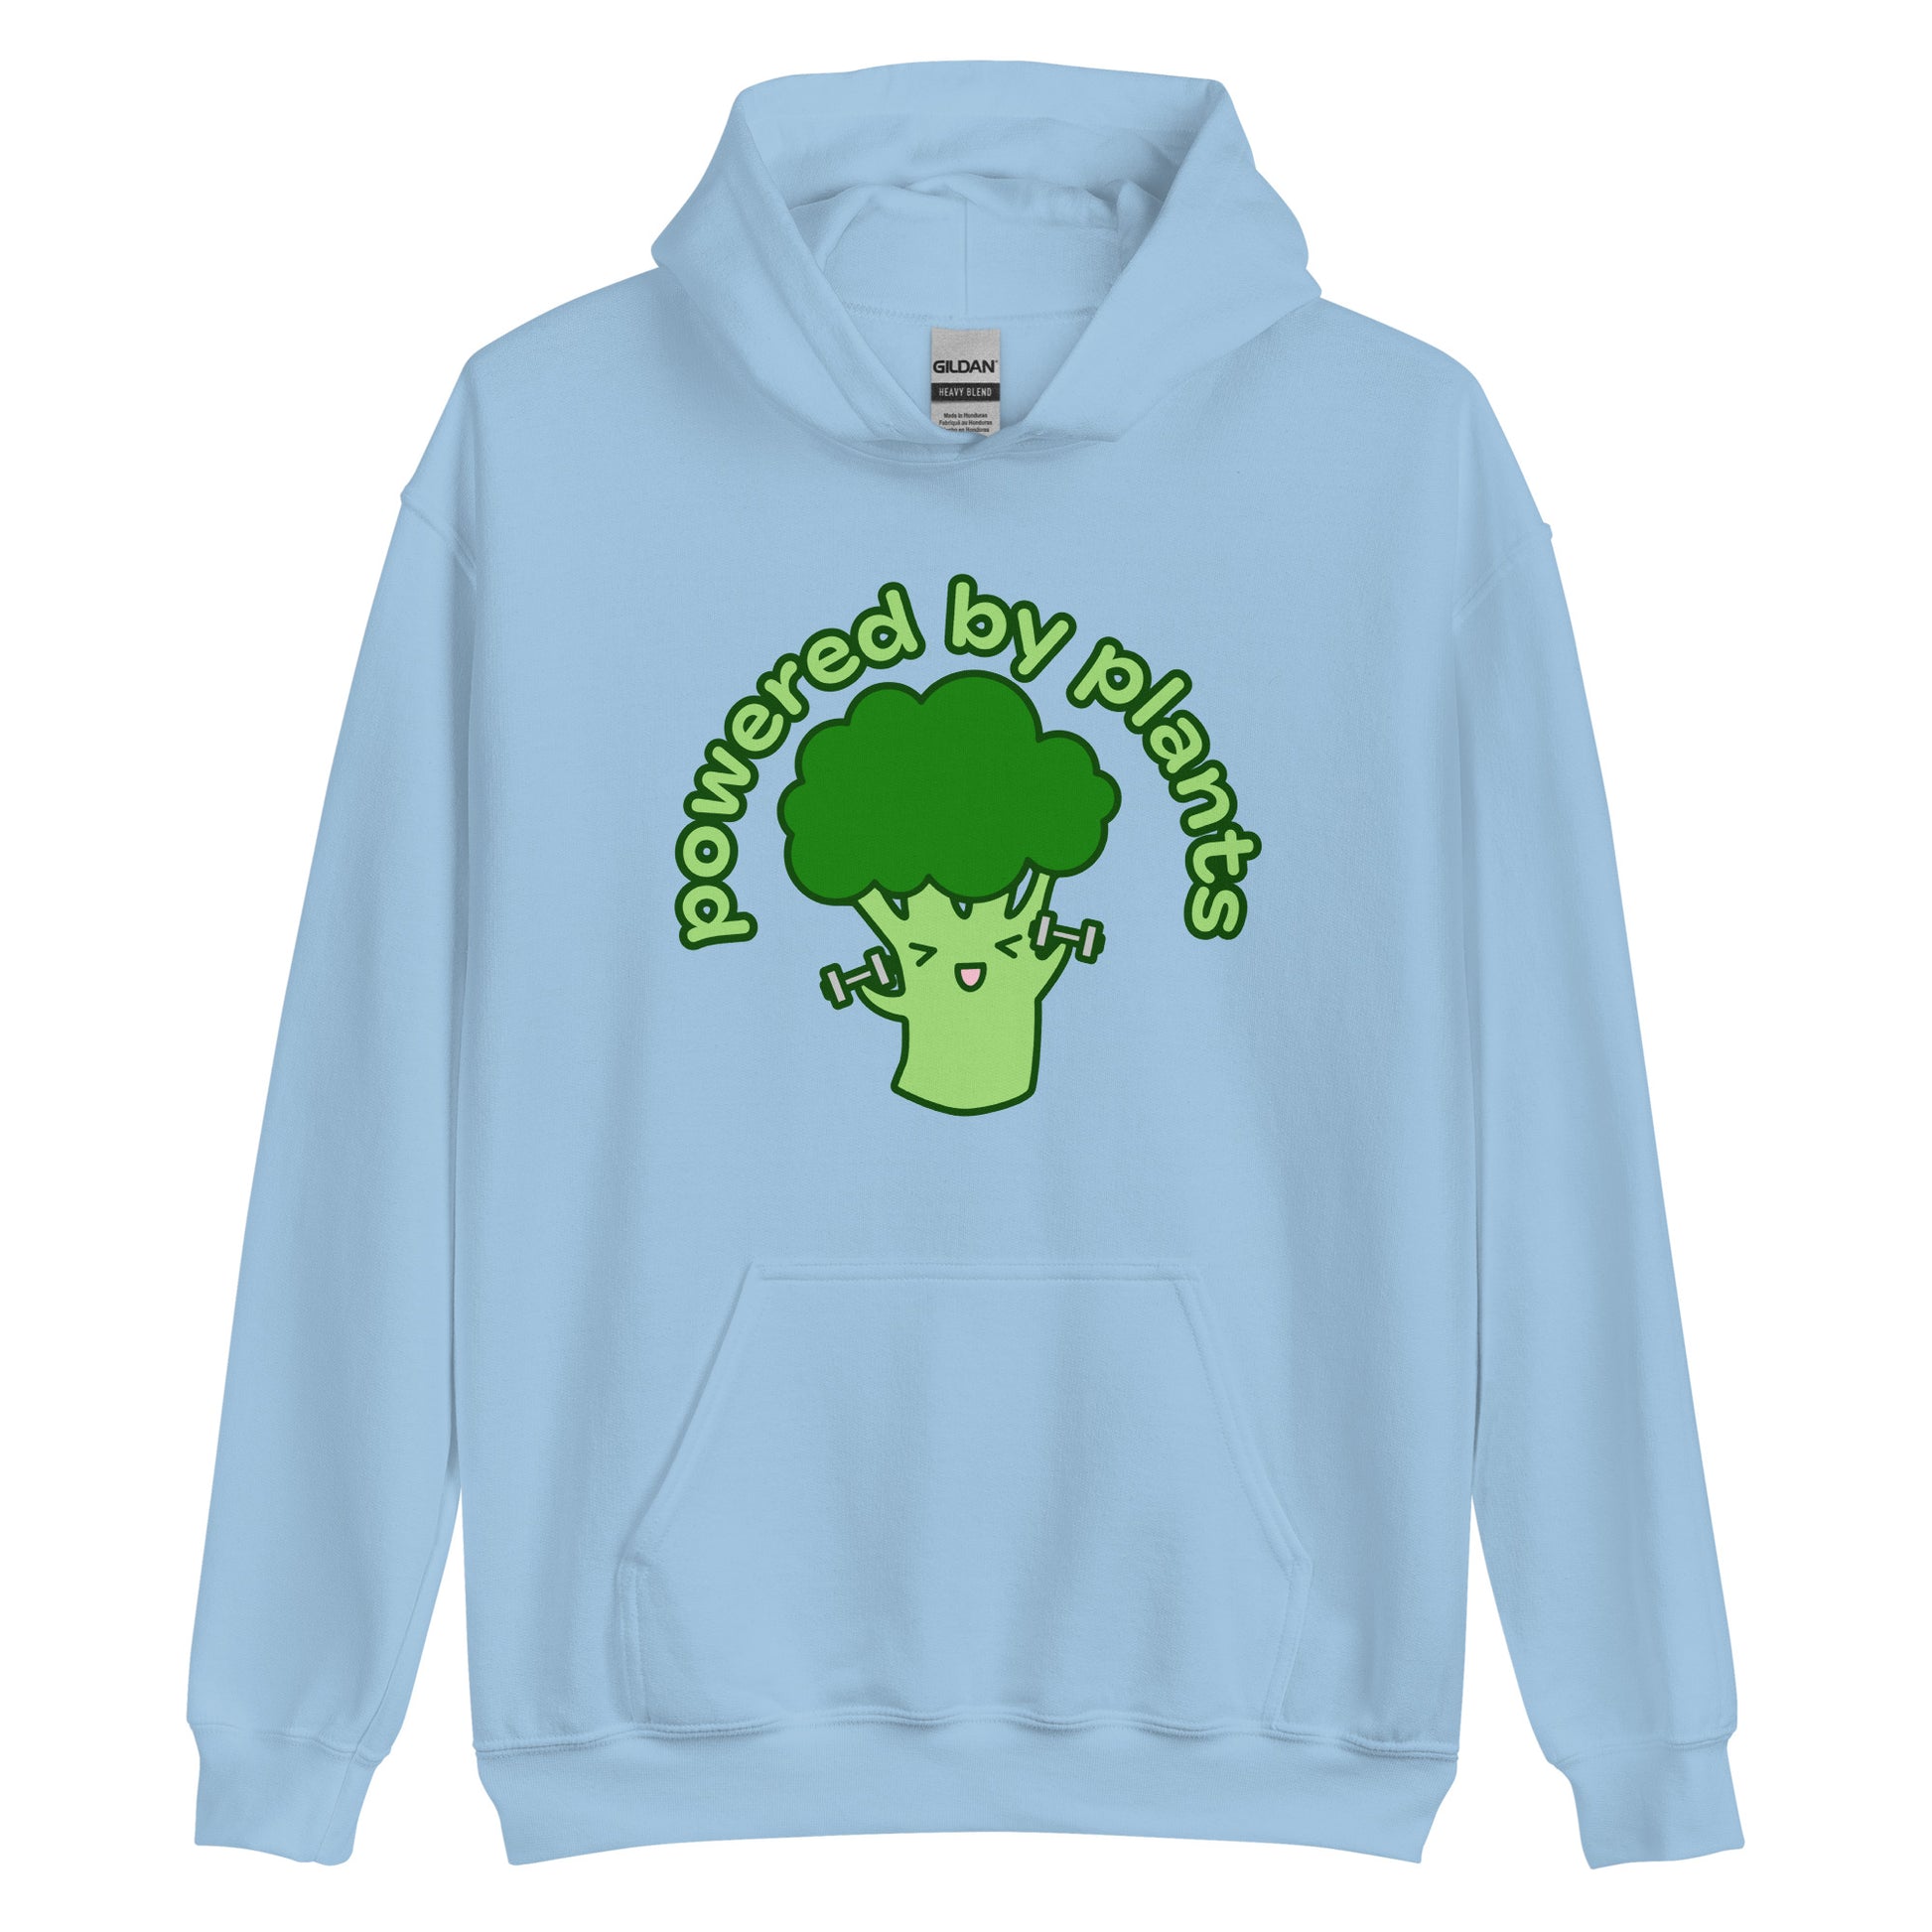 A light blue hooded sweatshirt featuring an illustration of a cartoon broccoli character. The broccoli is excitedly lifting weights, and text in an arc above the broccoli reads "powered by plants".